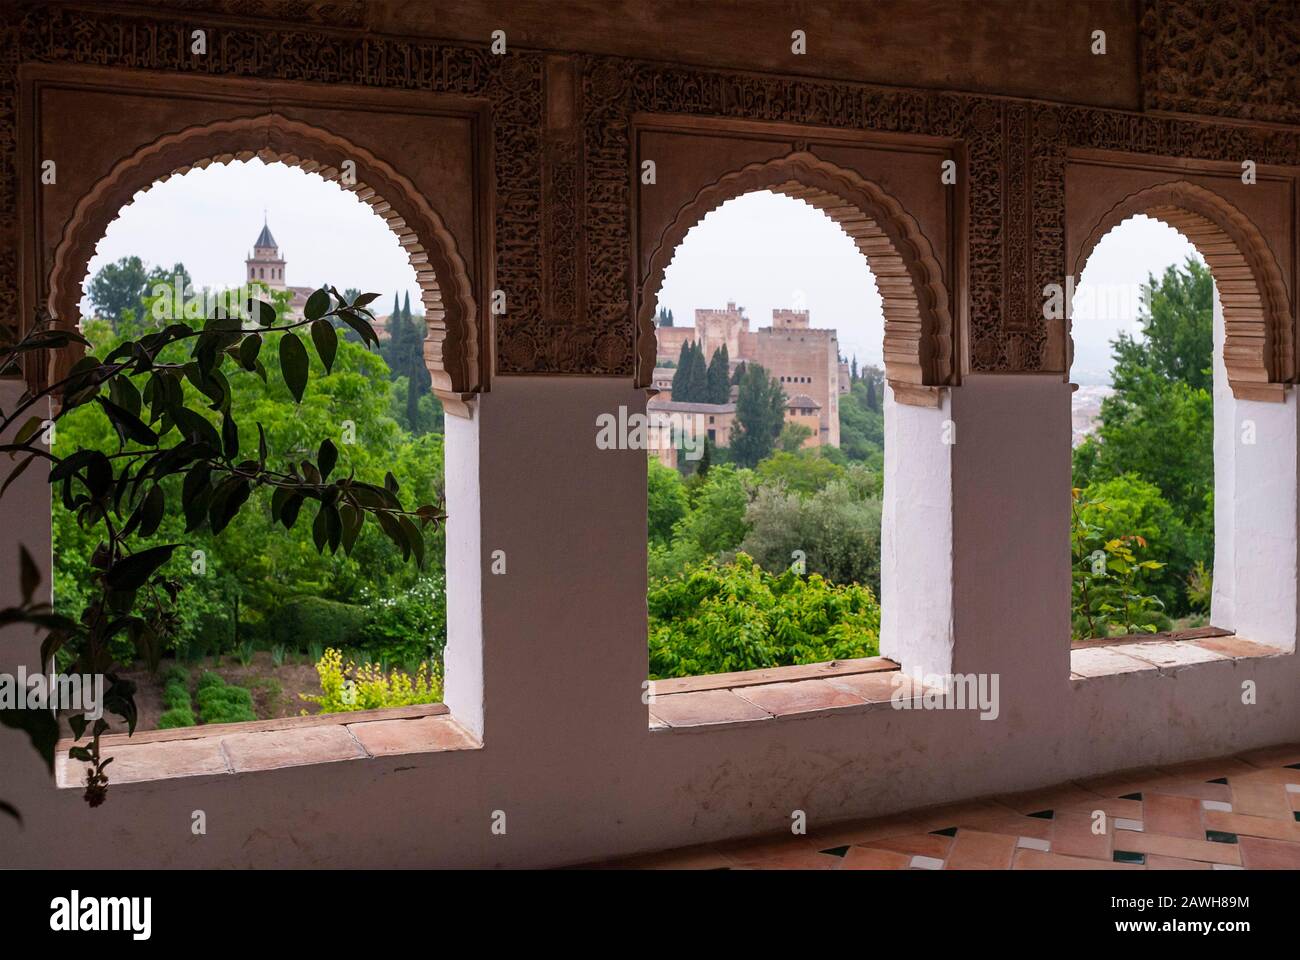 The Generalife Castle at the Alhambra Palace, Granada, Spain Stock Photo